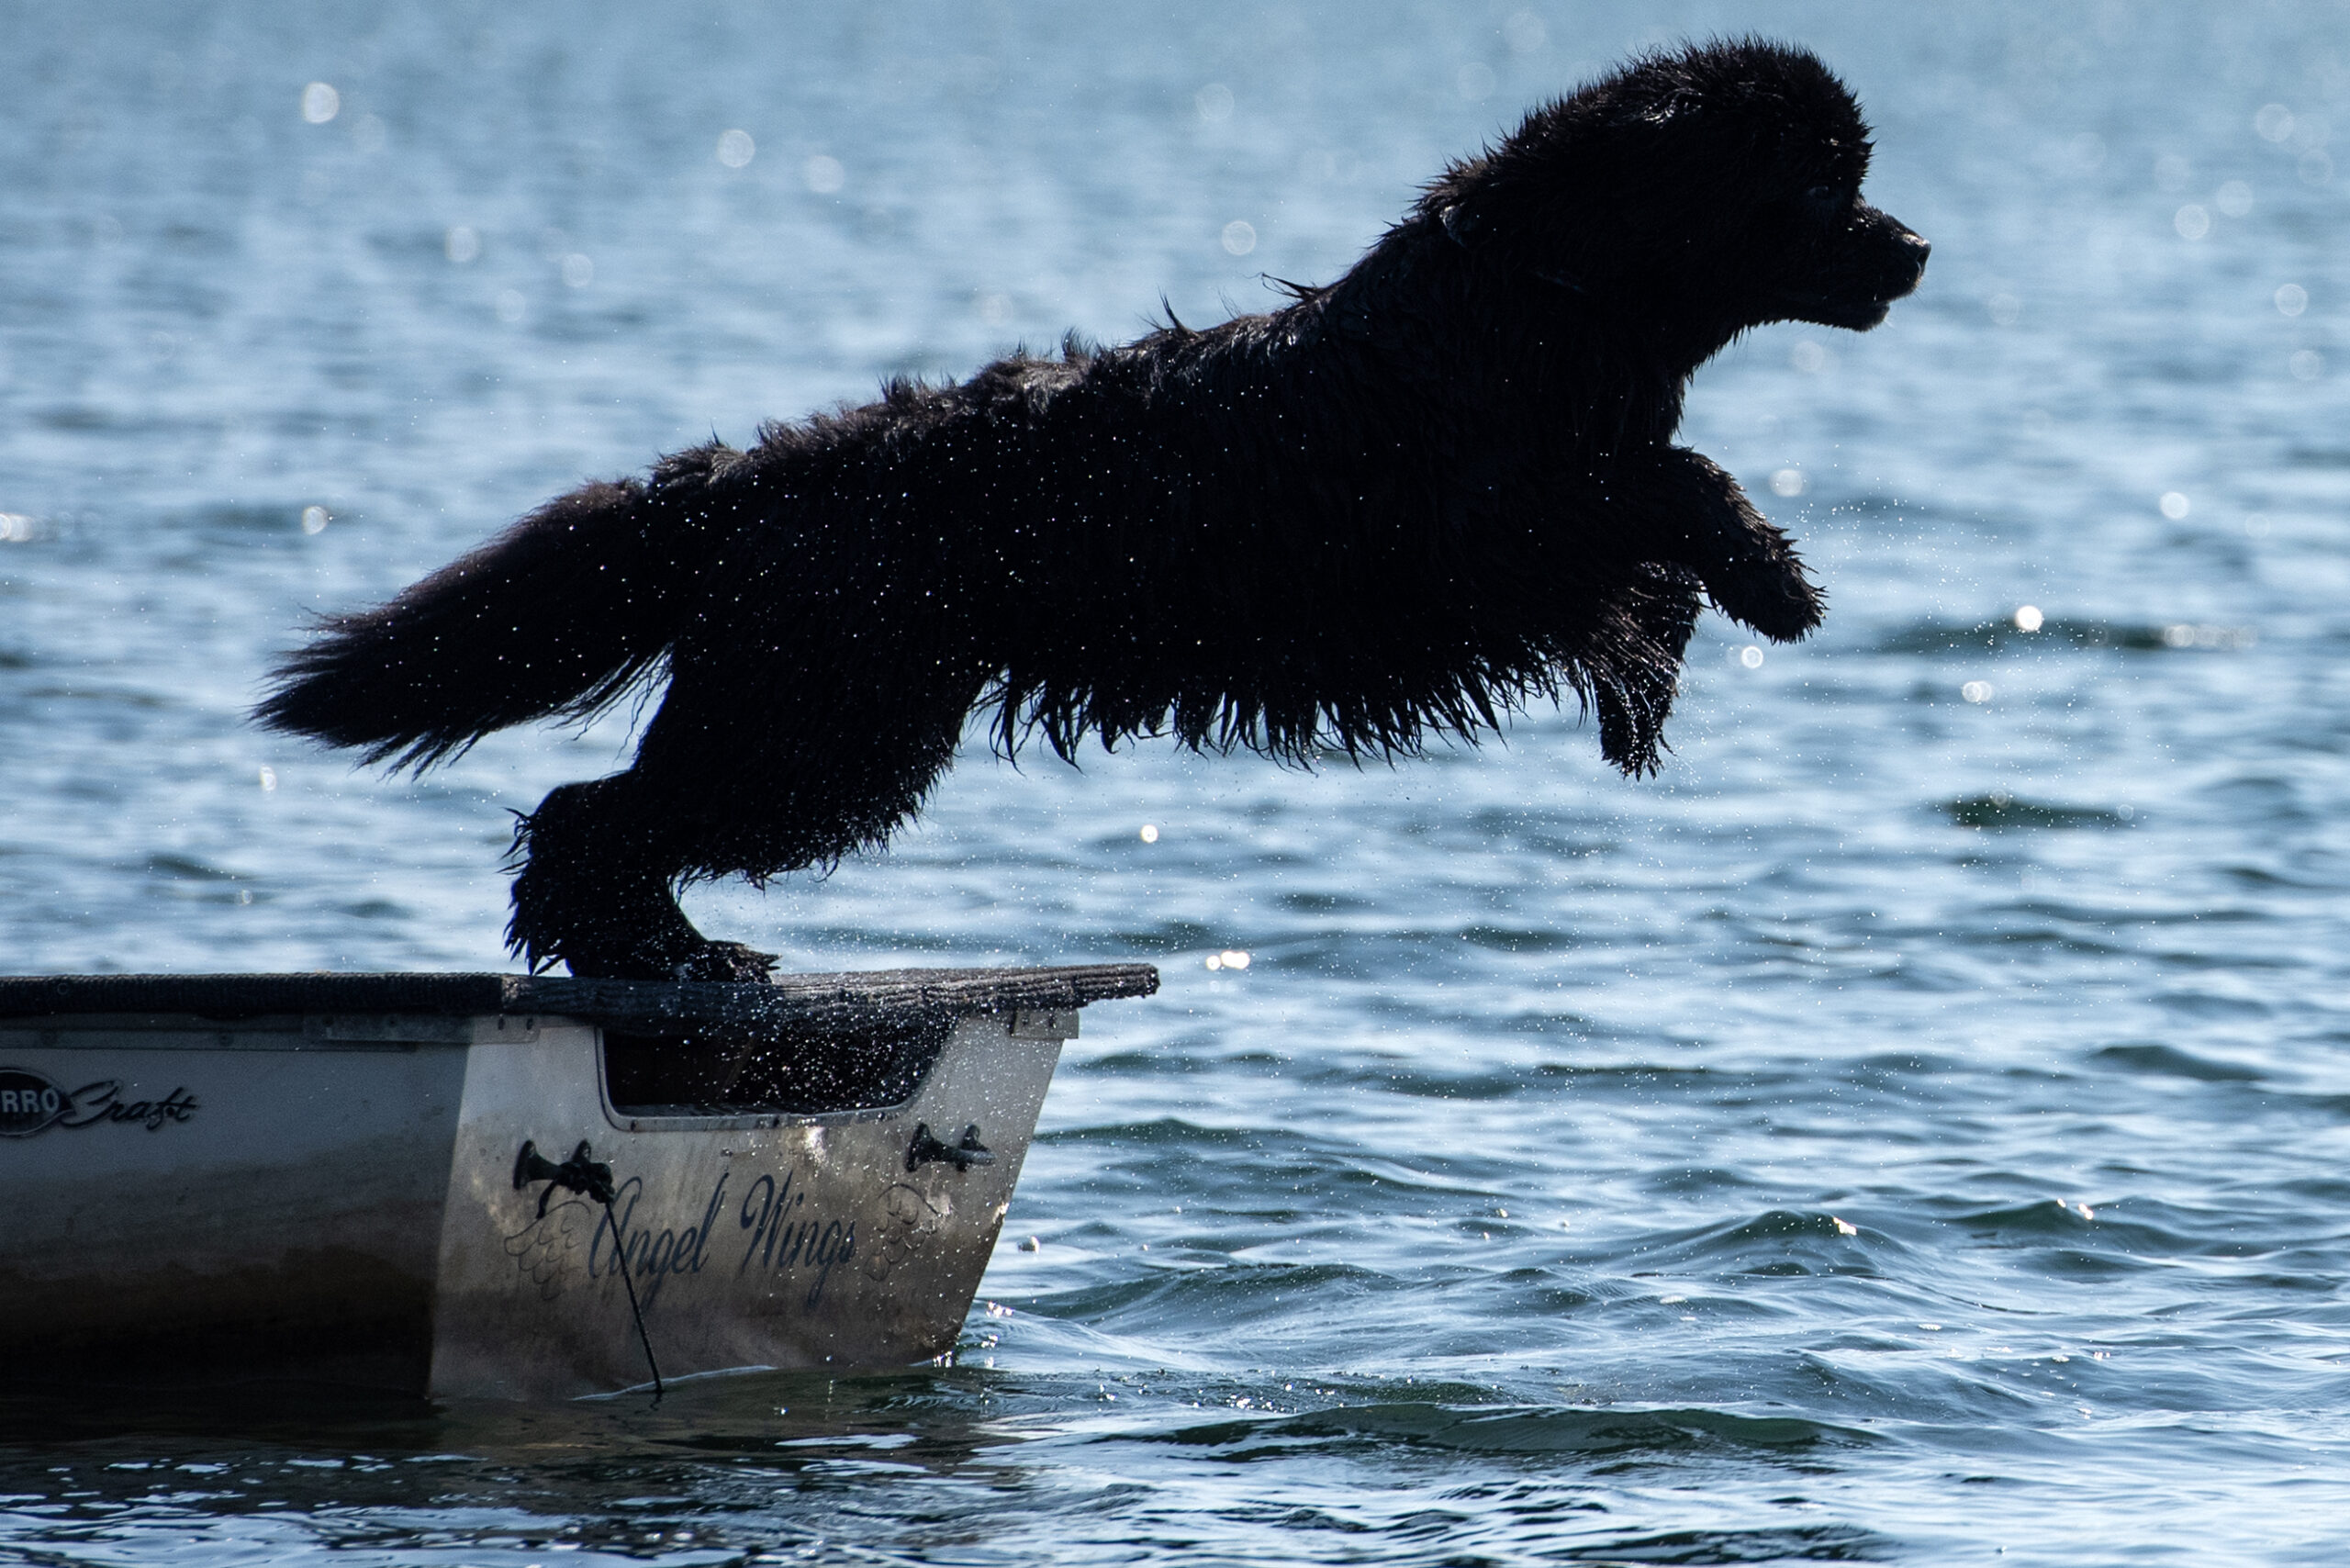 A black dog leaps into the air from the back of a boat.